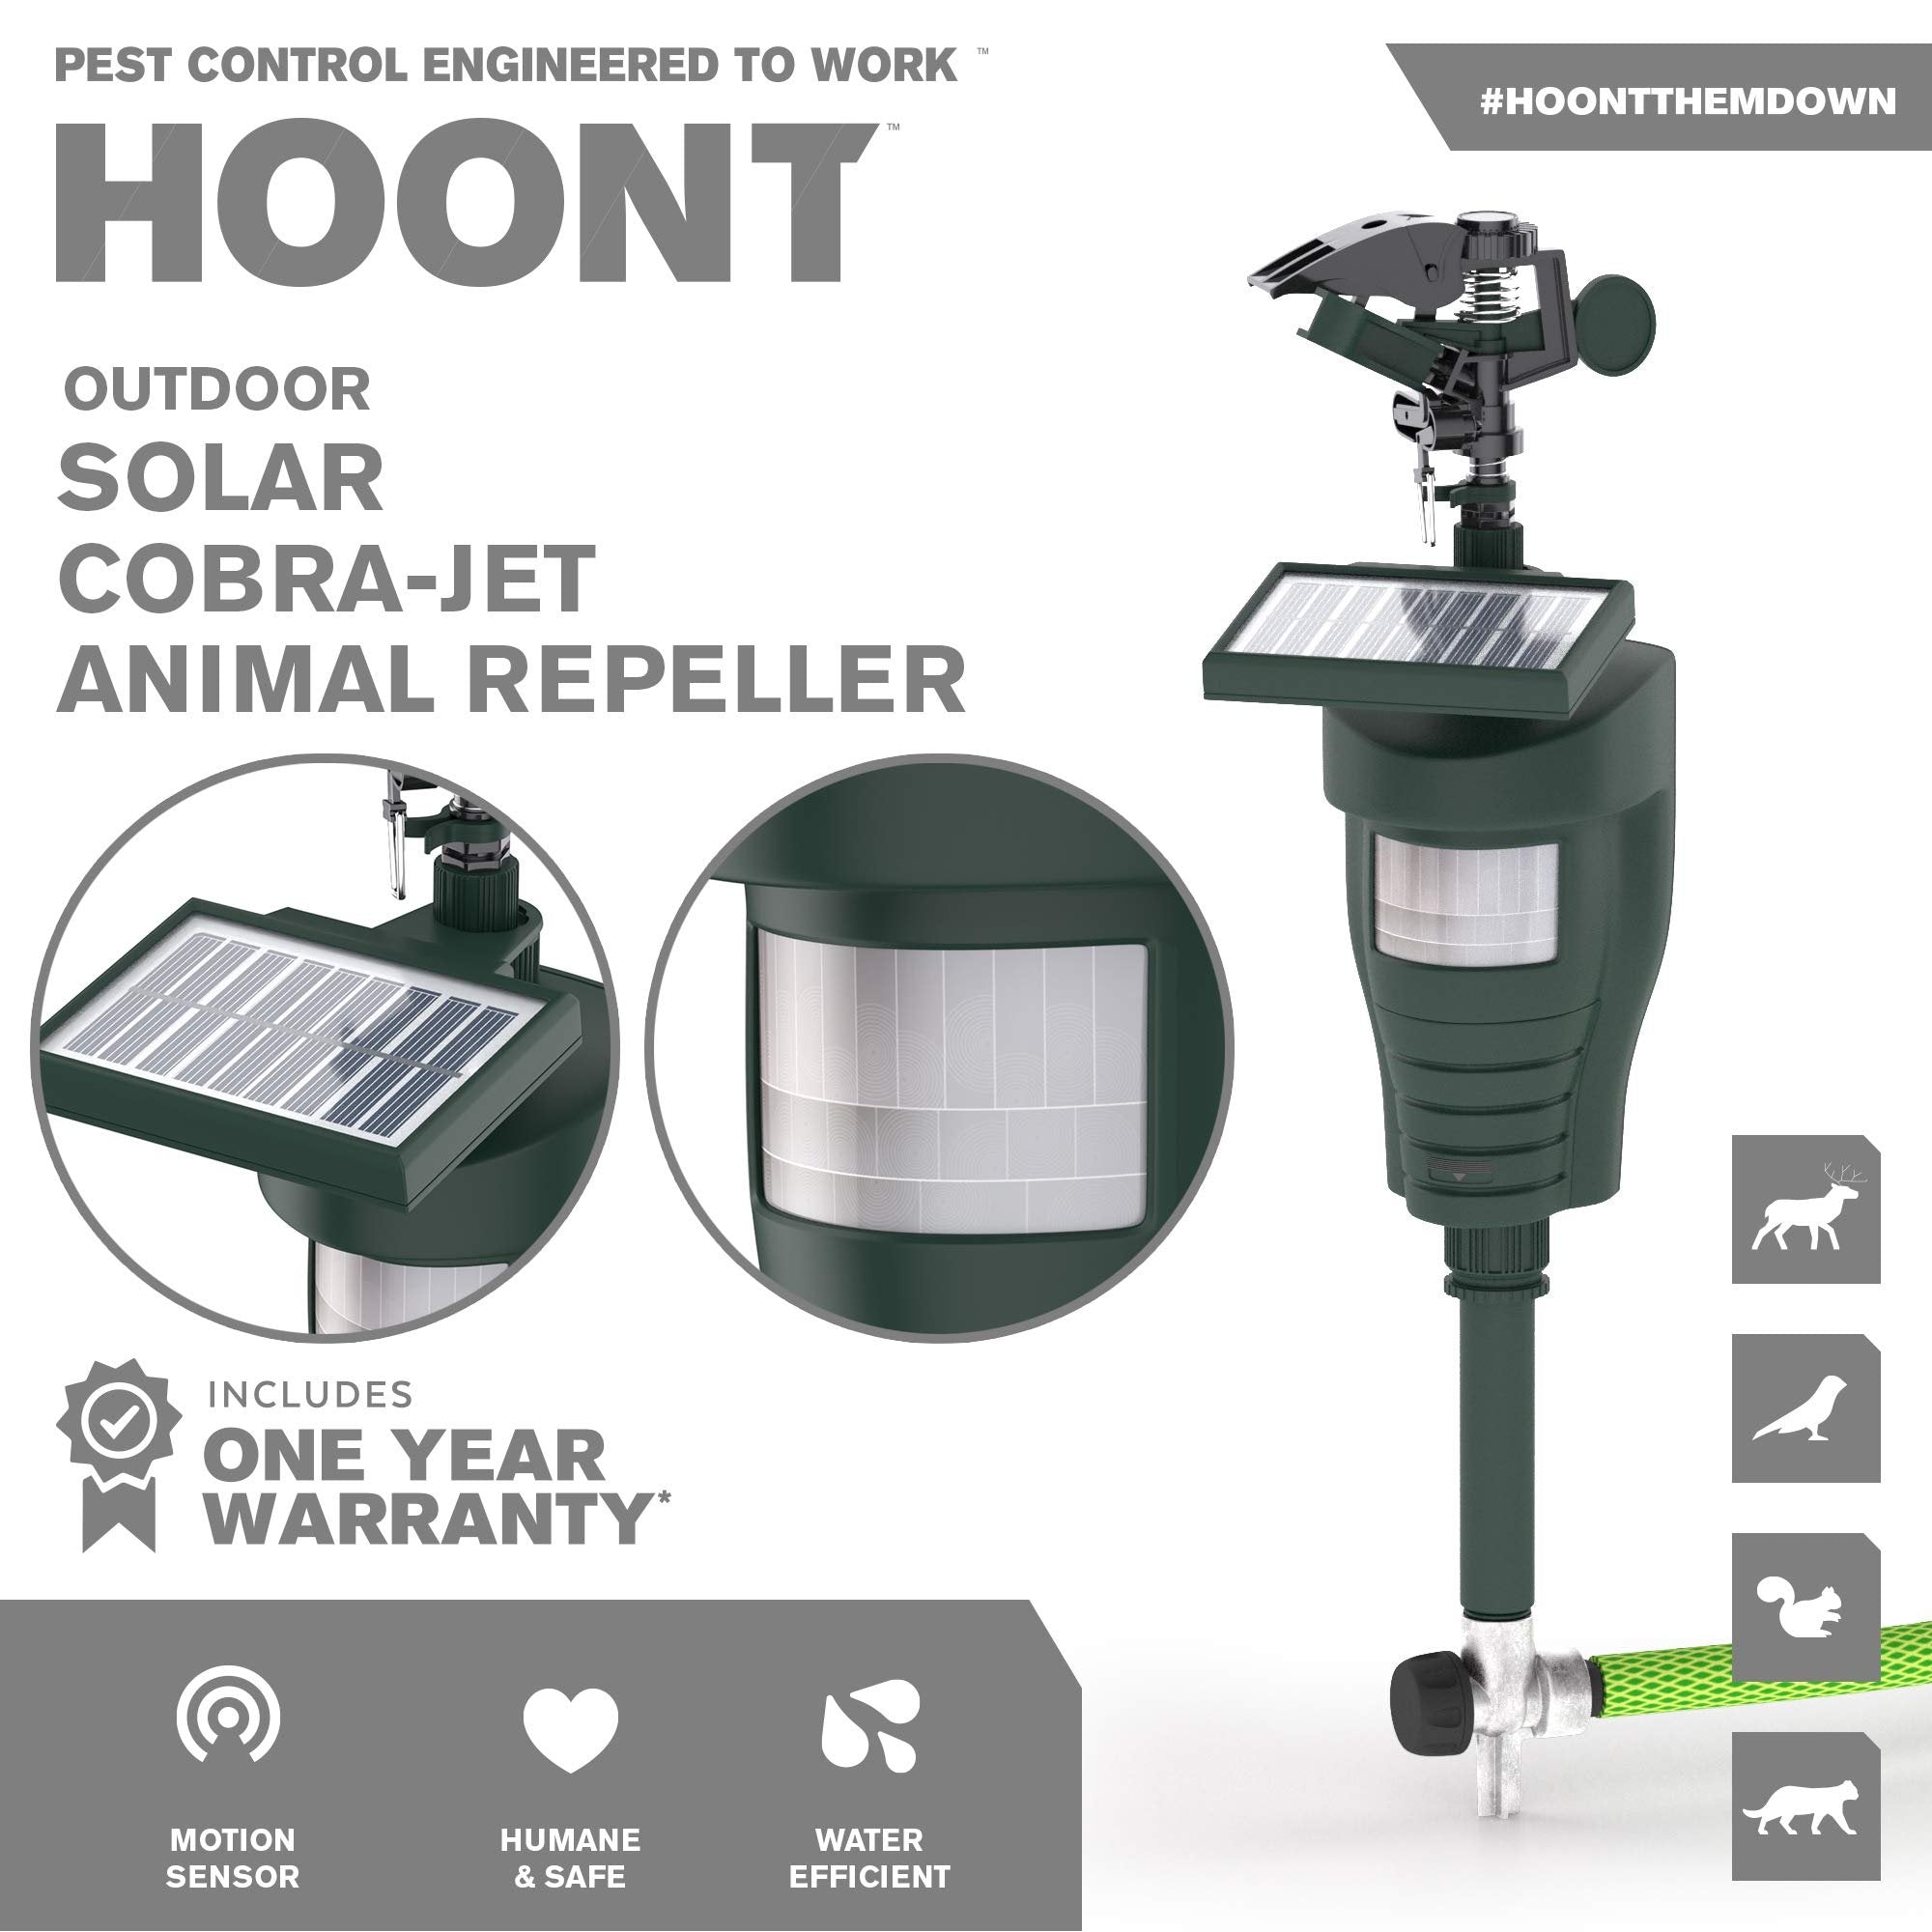 Hoont Cobra Animal Repeller | Solar-Powered Water Blaster | Motion-Activated | Size: Large | Scare Deer, Rabbits, Squirrels & More